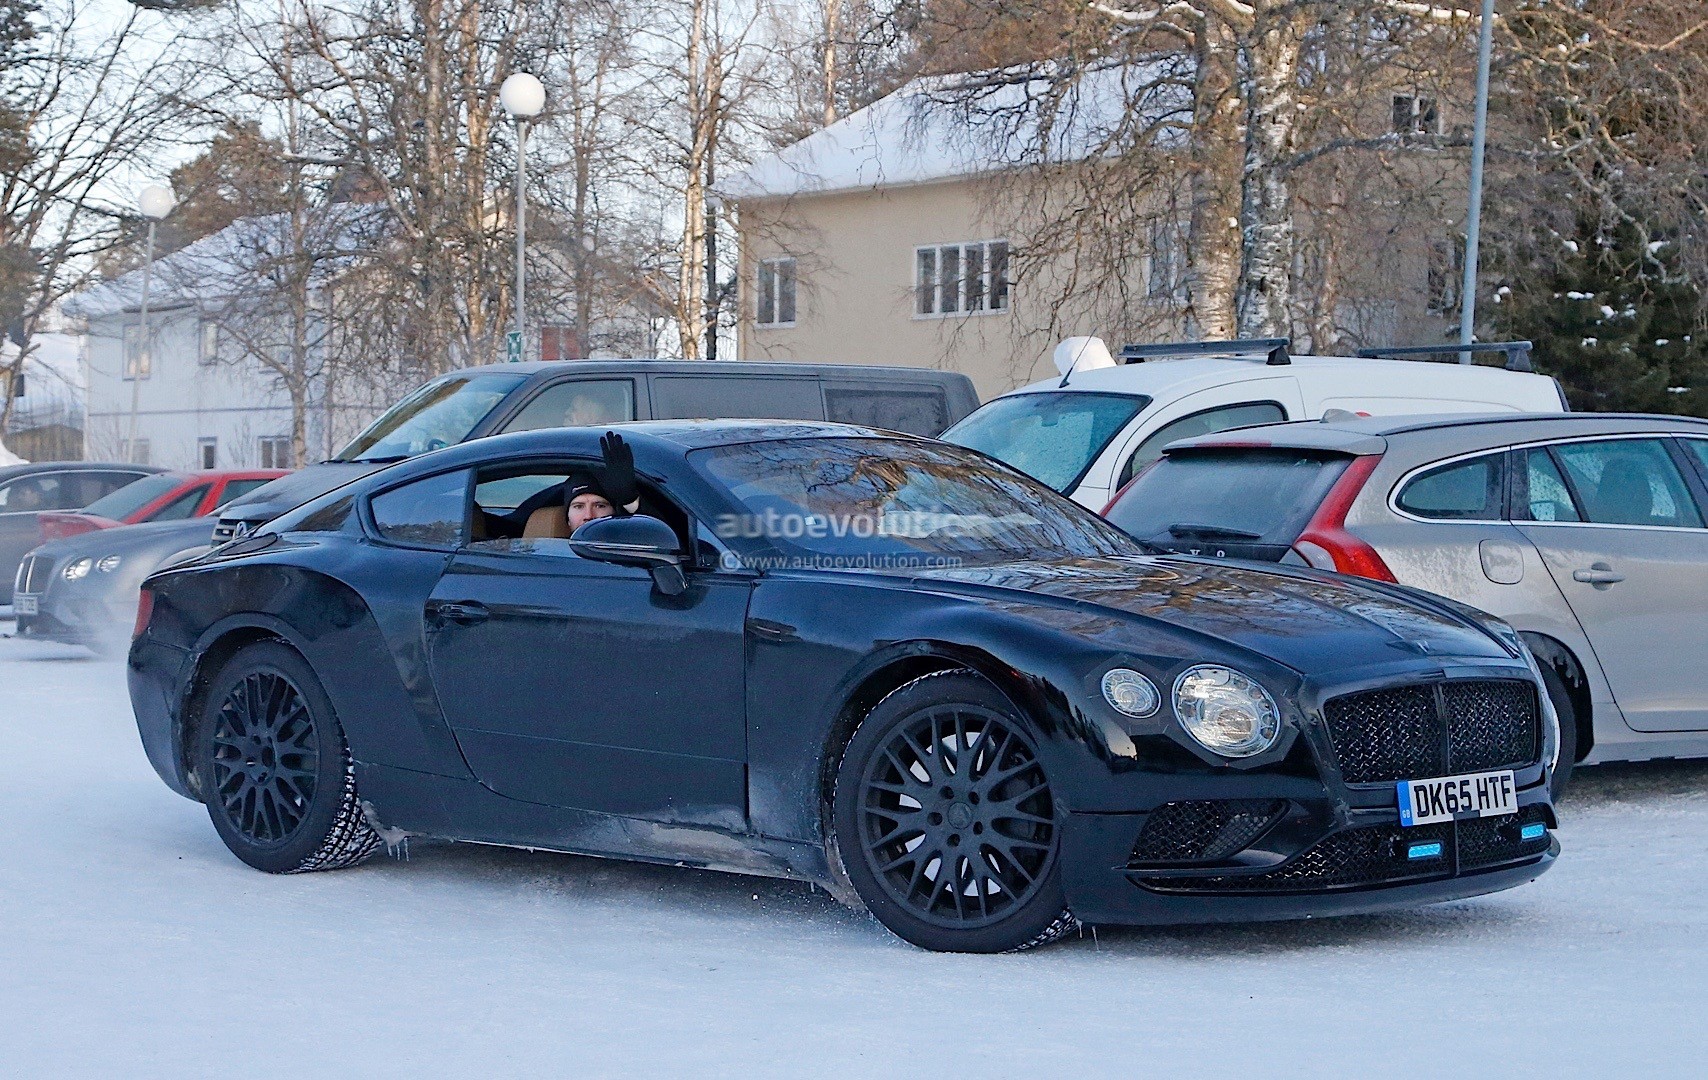 2018 Bentley Continental GT Spied Again, EXP 10 Speed 6 Headlights ...